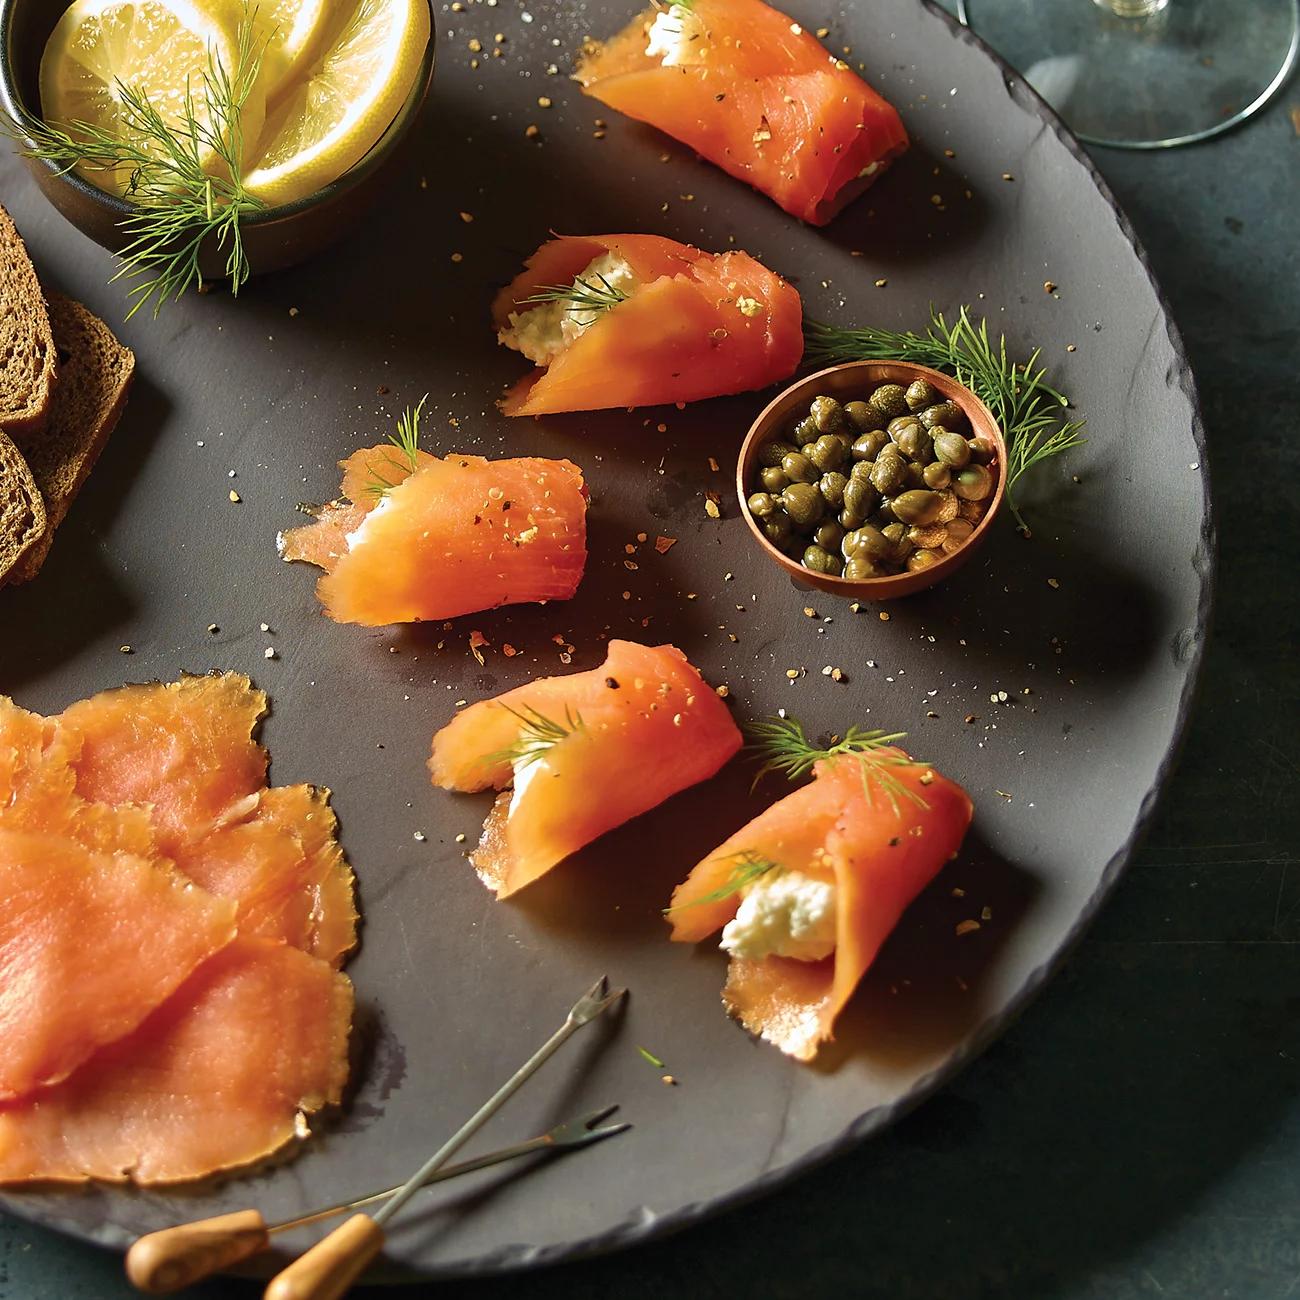 cured or smoked salmon - Is cured salmon the same as smoked salmon